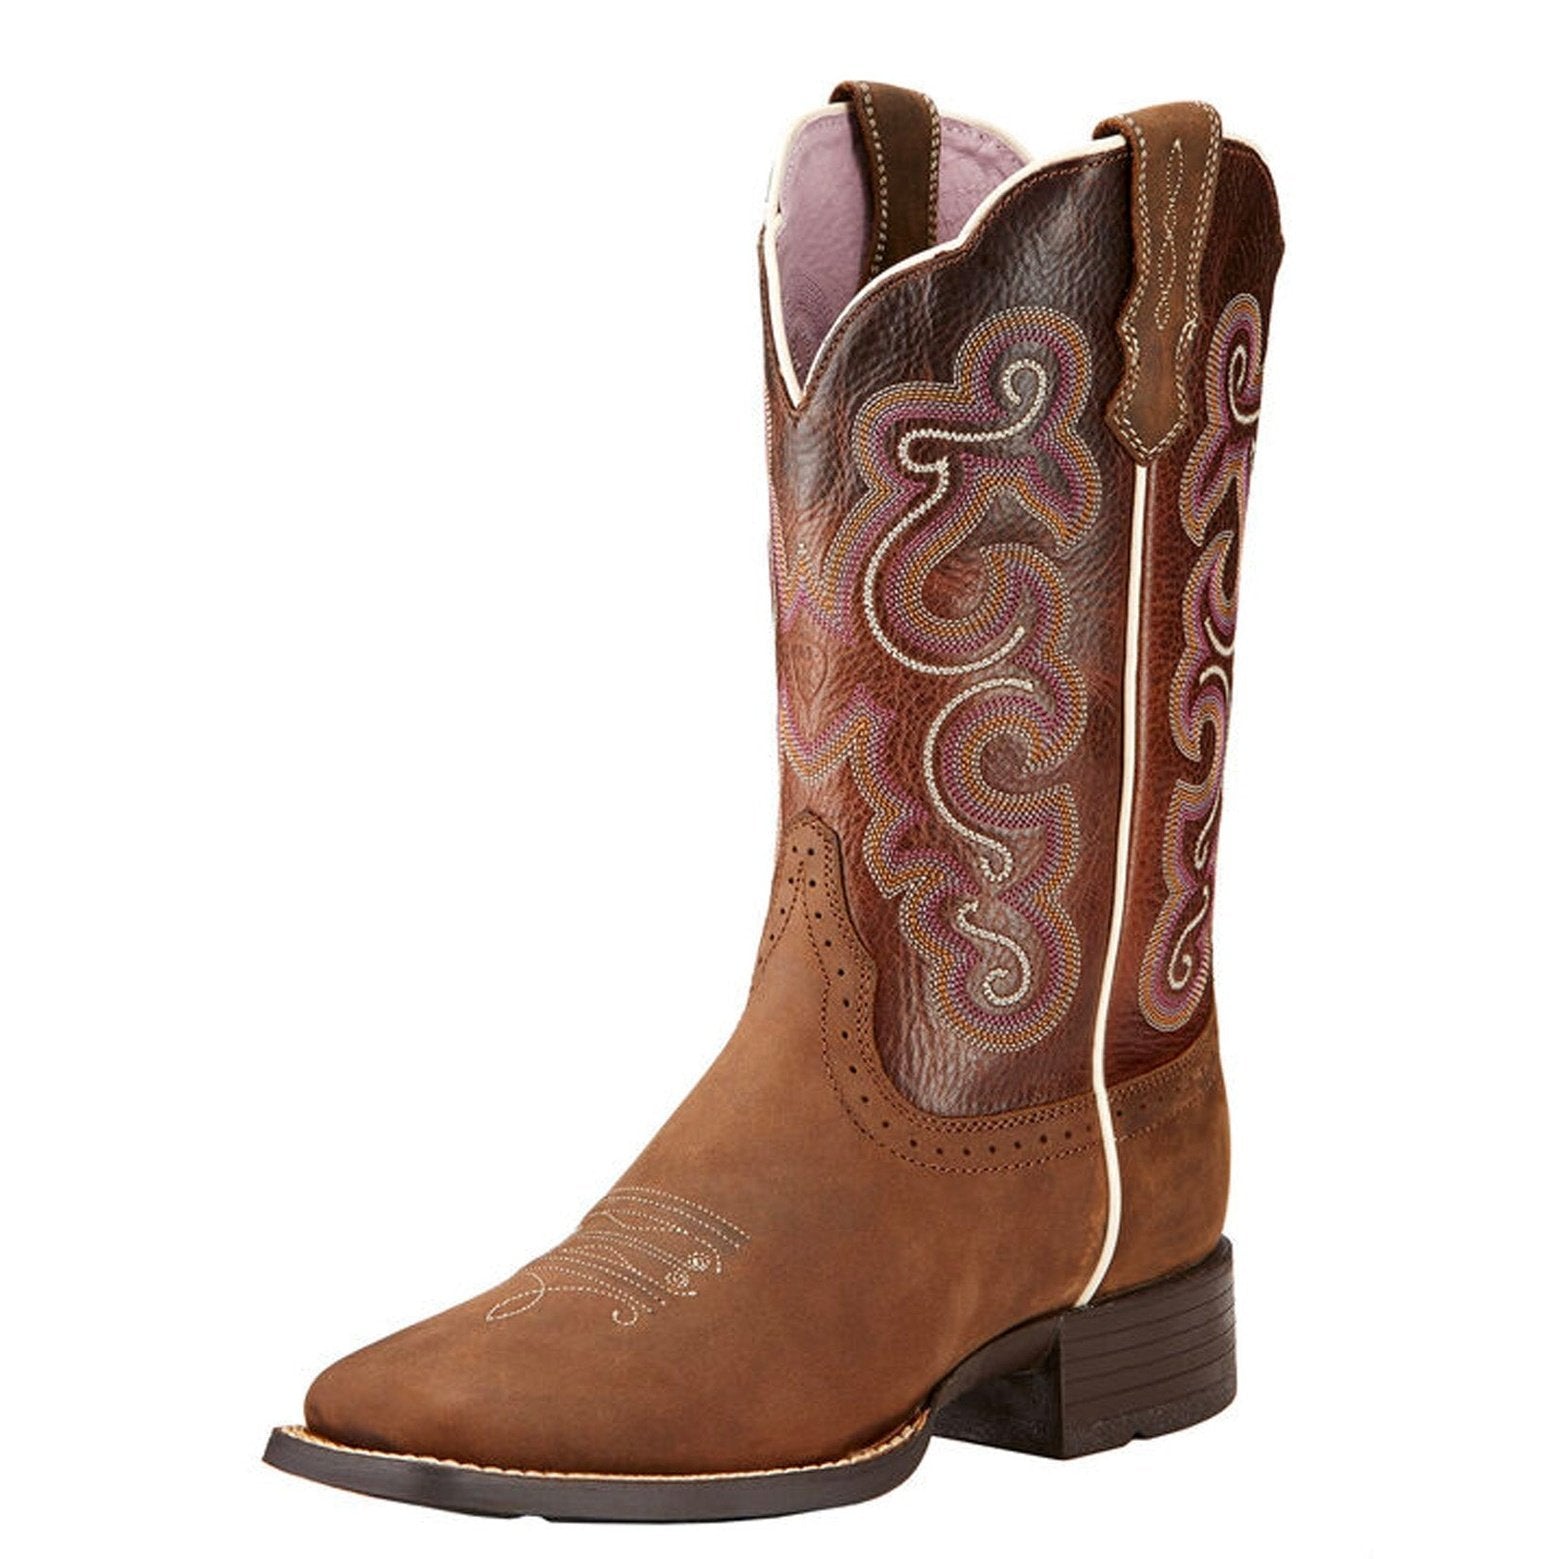 Ariat Women’s Cowgirl Boots Quickdraw 11" Wide Square Toe 10006304 - Ariat